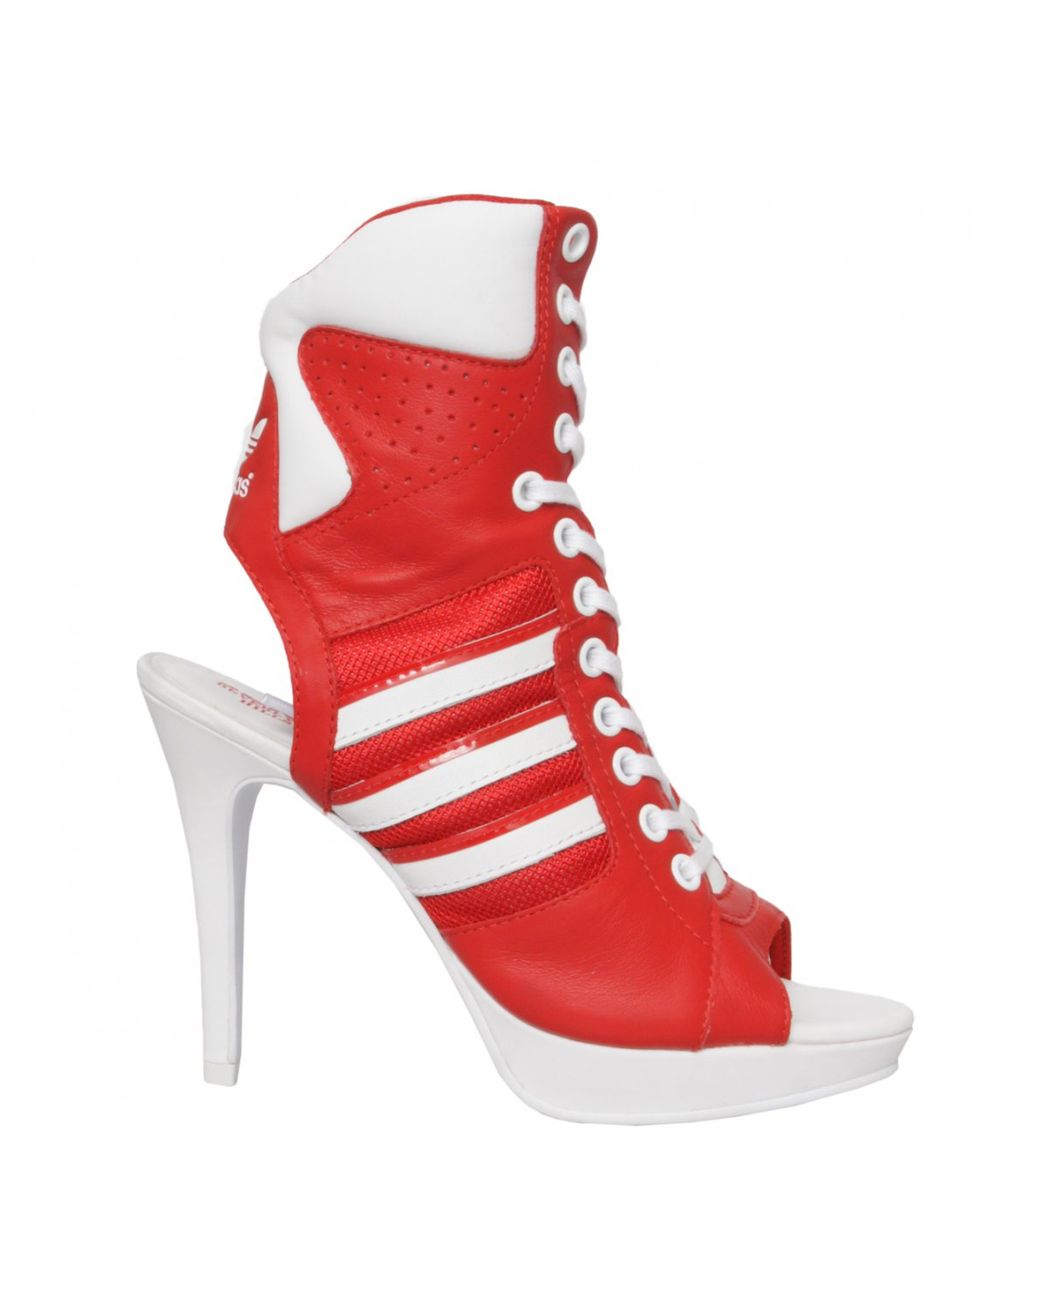 Persona a cargo Pagar tributo rifle Jeremy Scott for adidas Lace Up High Heels Red | Lyst UK